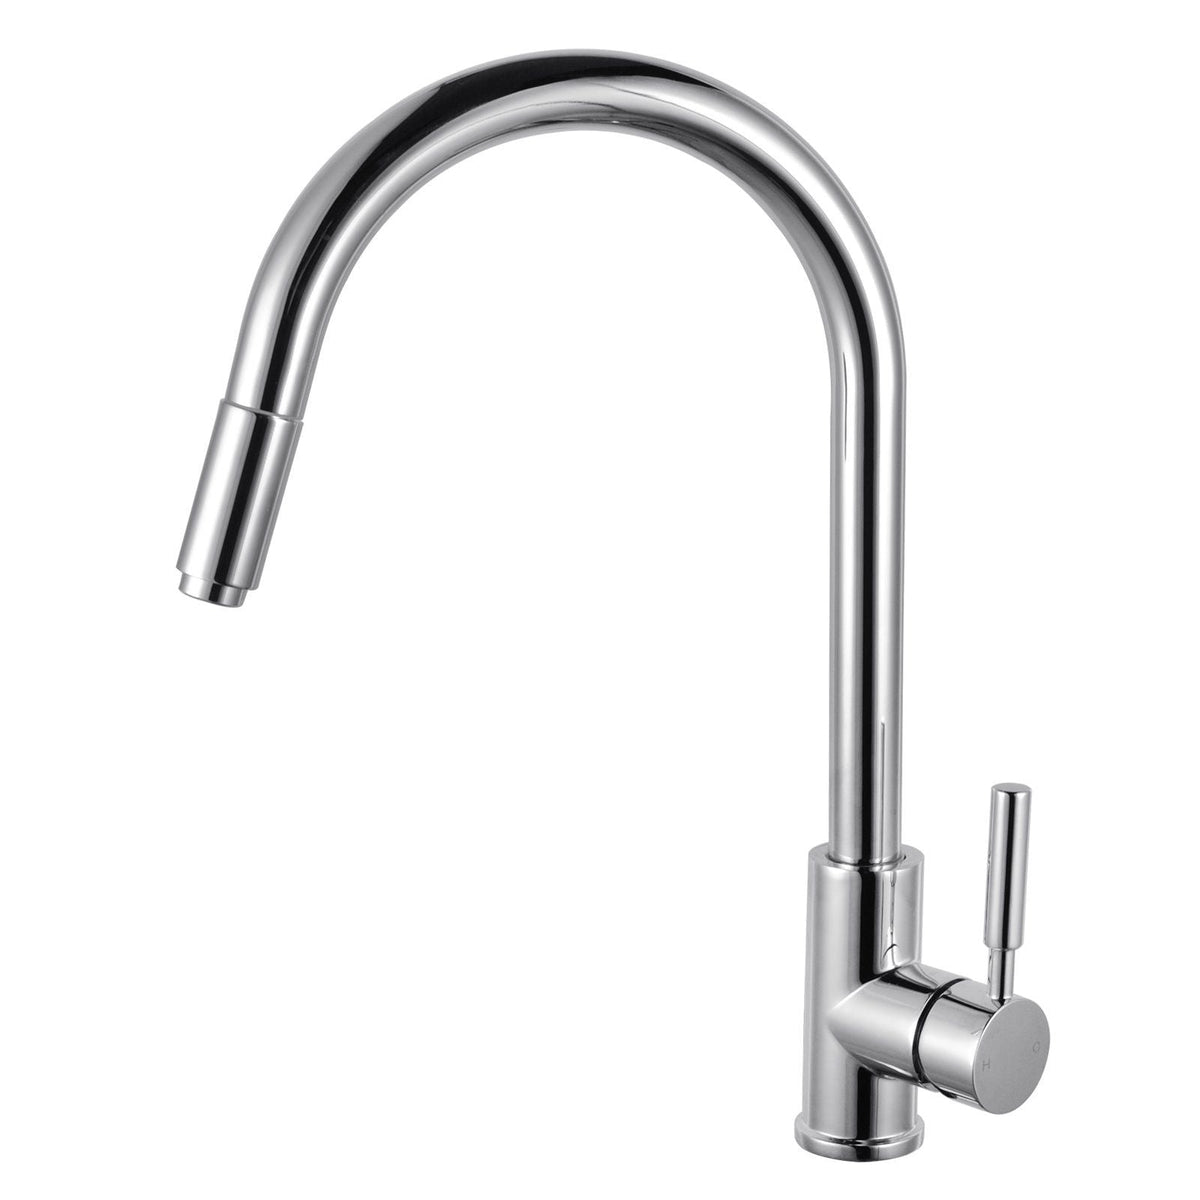 Round Chrome Pull Out Kitchen Sink Mixer Tap